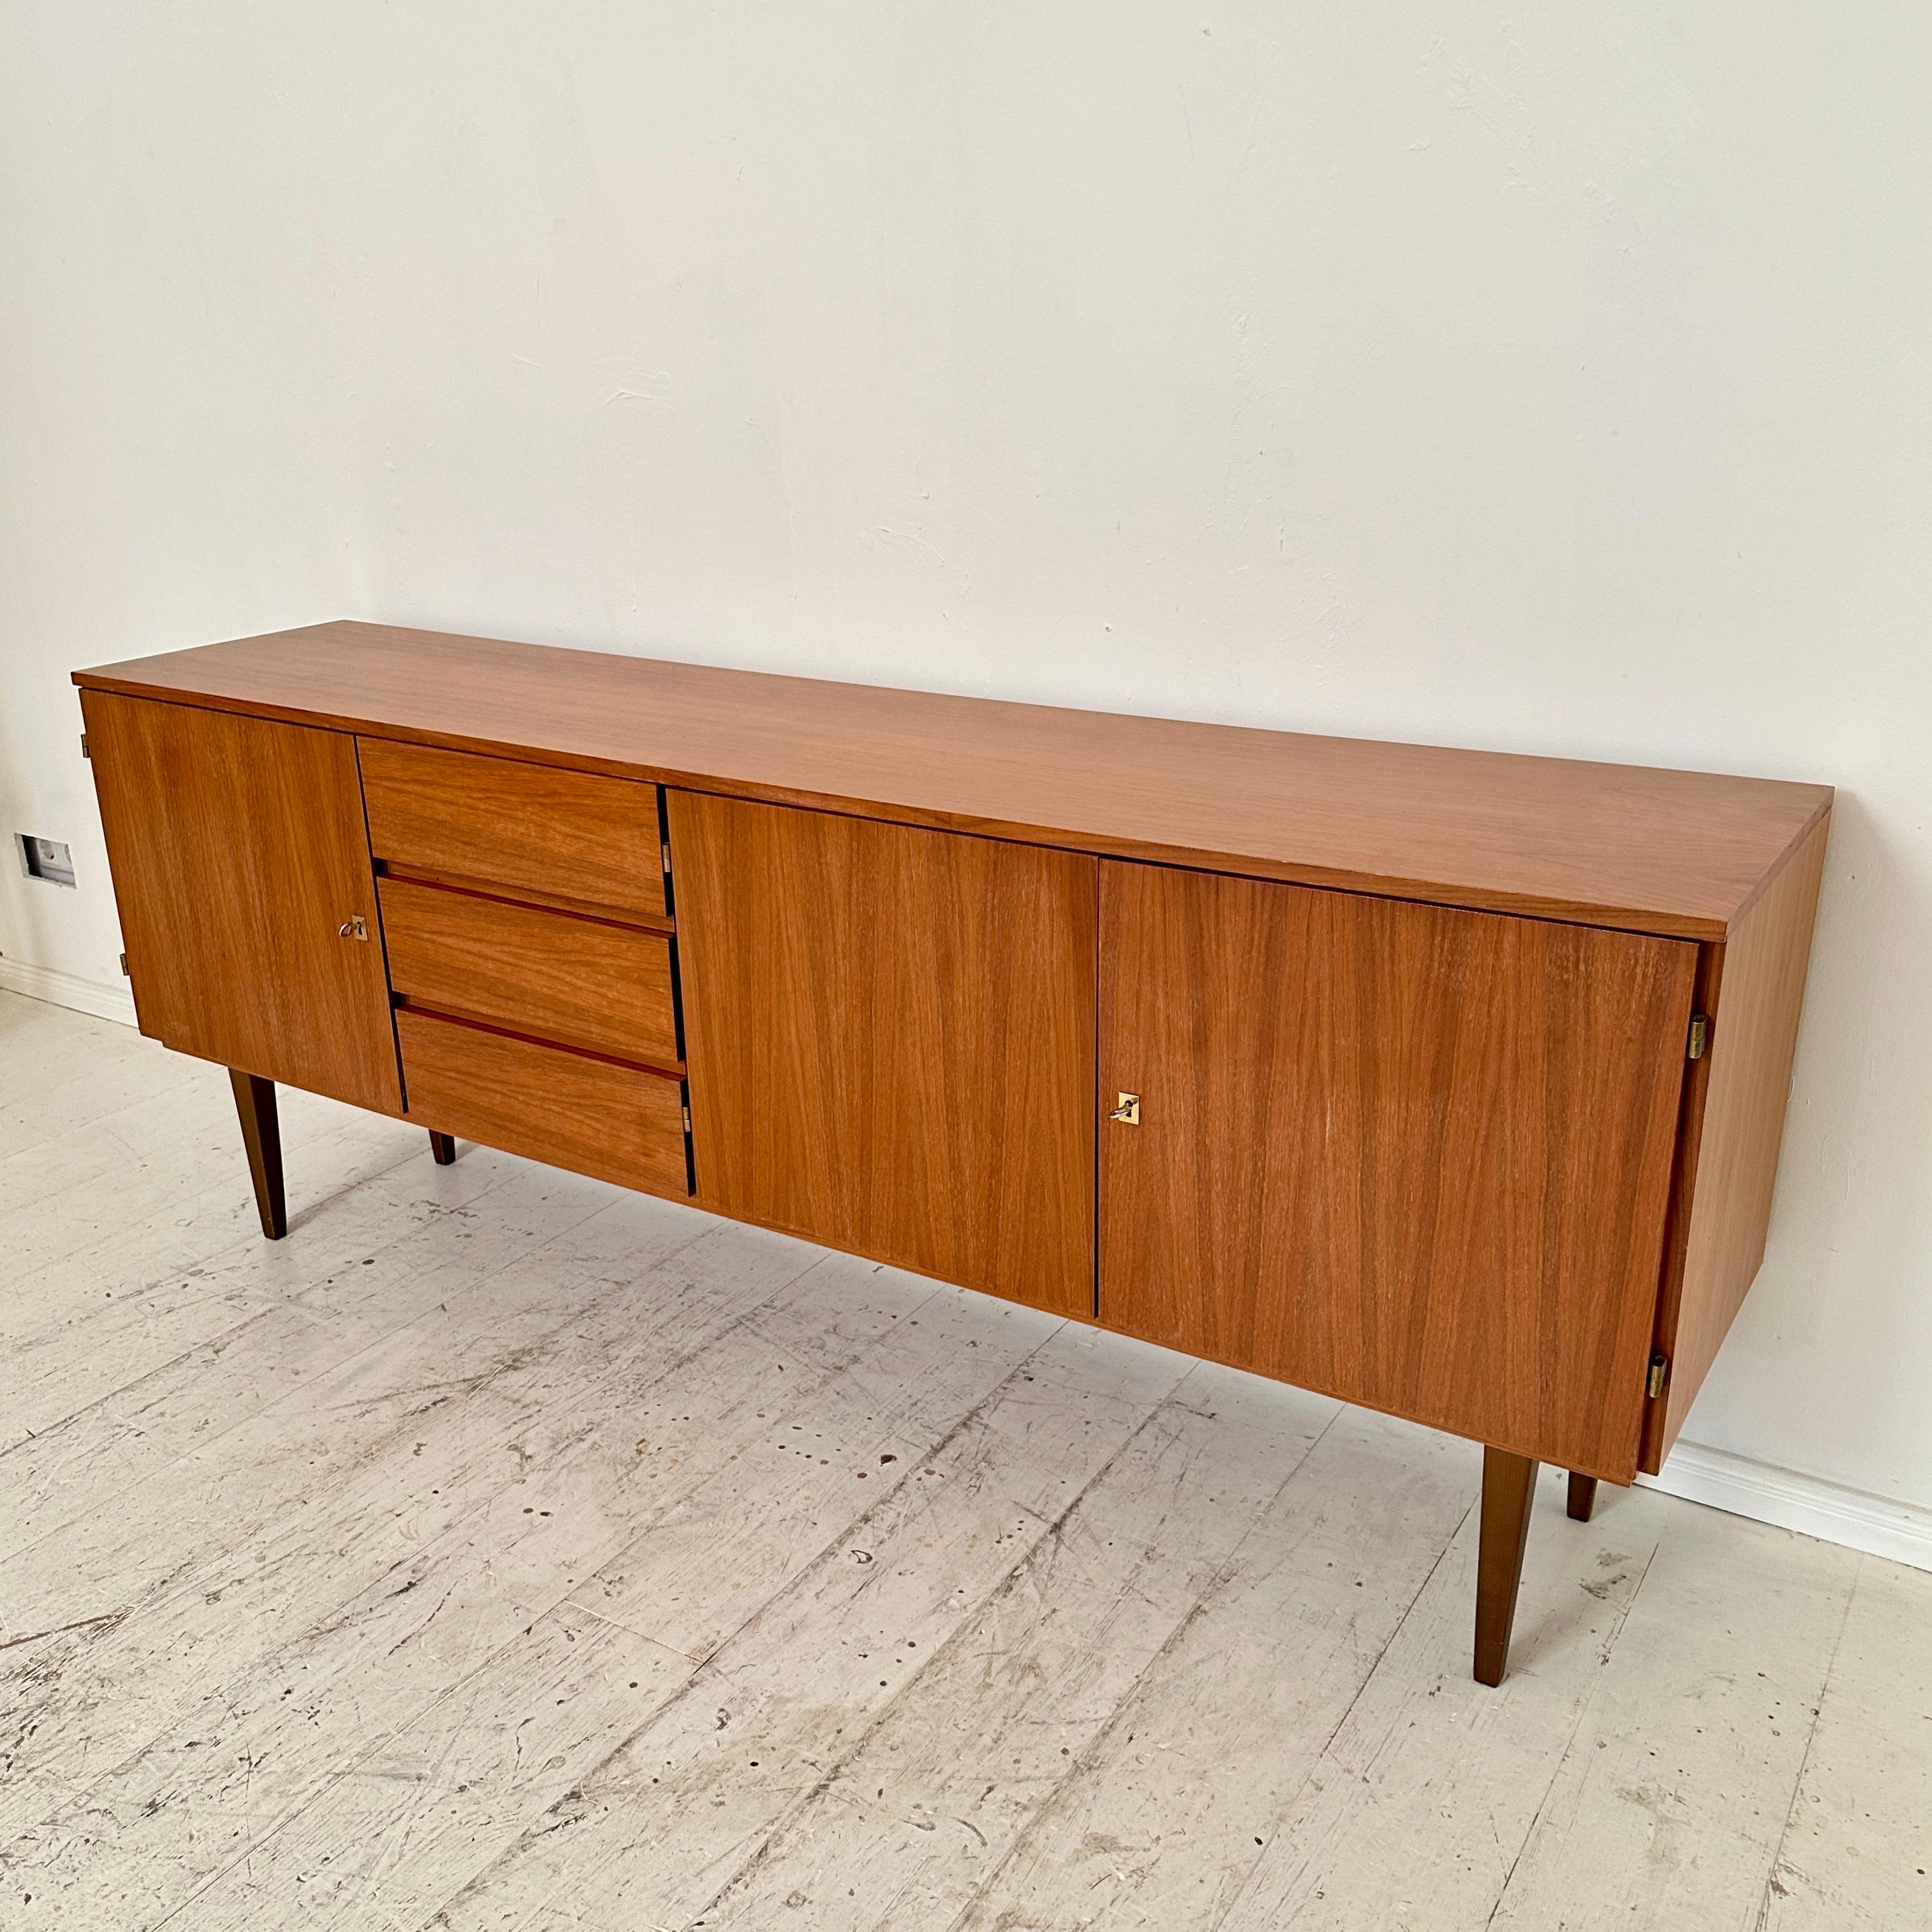 Mid-20th Century Mid Century German Sideboard Brown Walnut with Drawers and Doors, around 1960